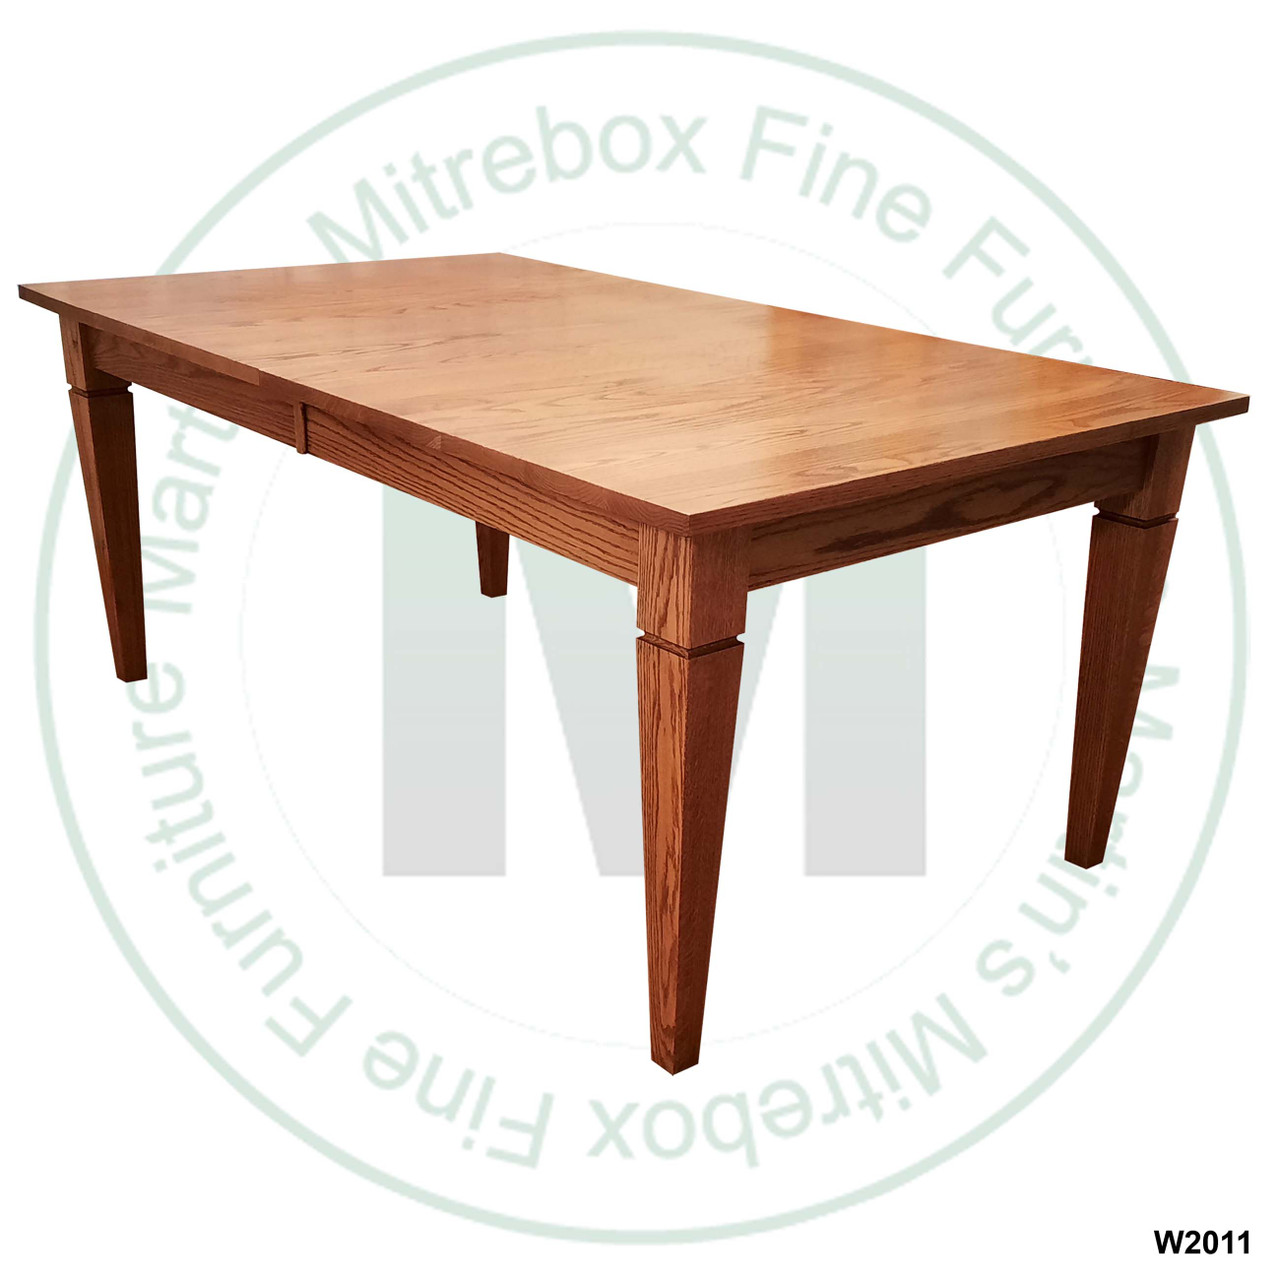 Oak Reesor Solid Top Harvest Table 36''D x 84''W x 30''H Table Has 1'' Thick Top